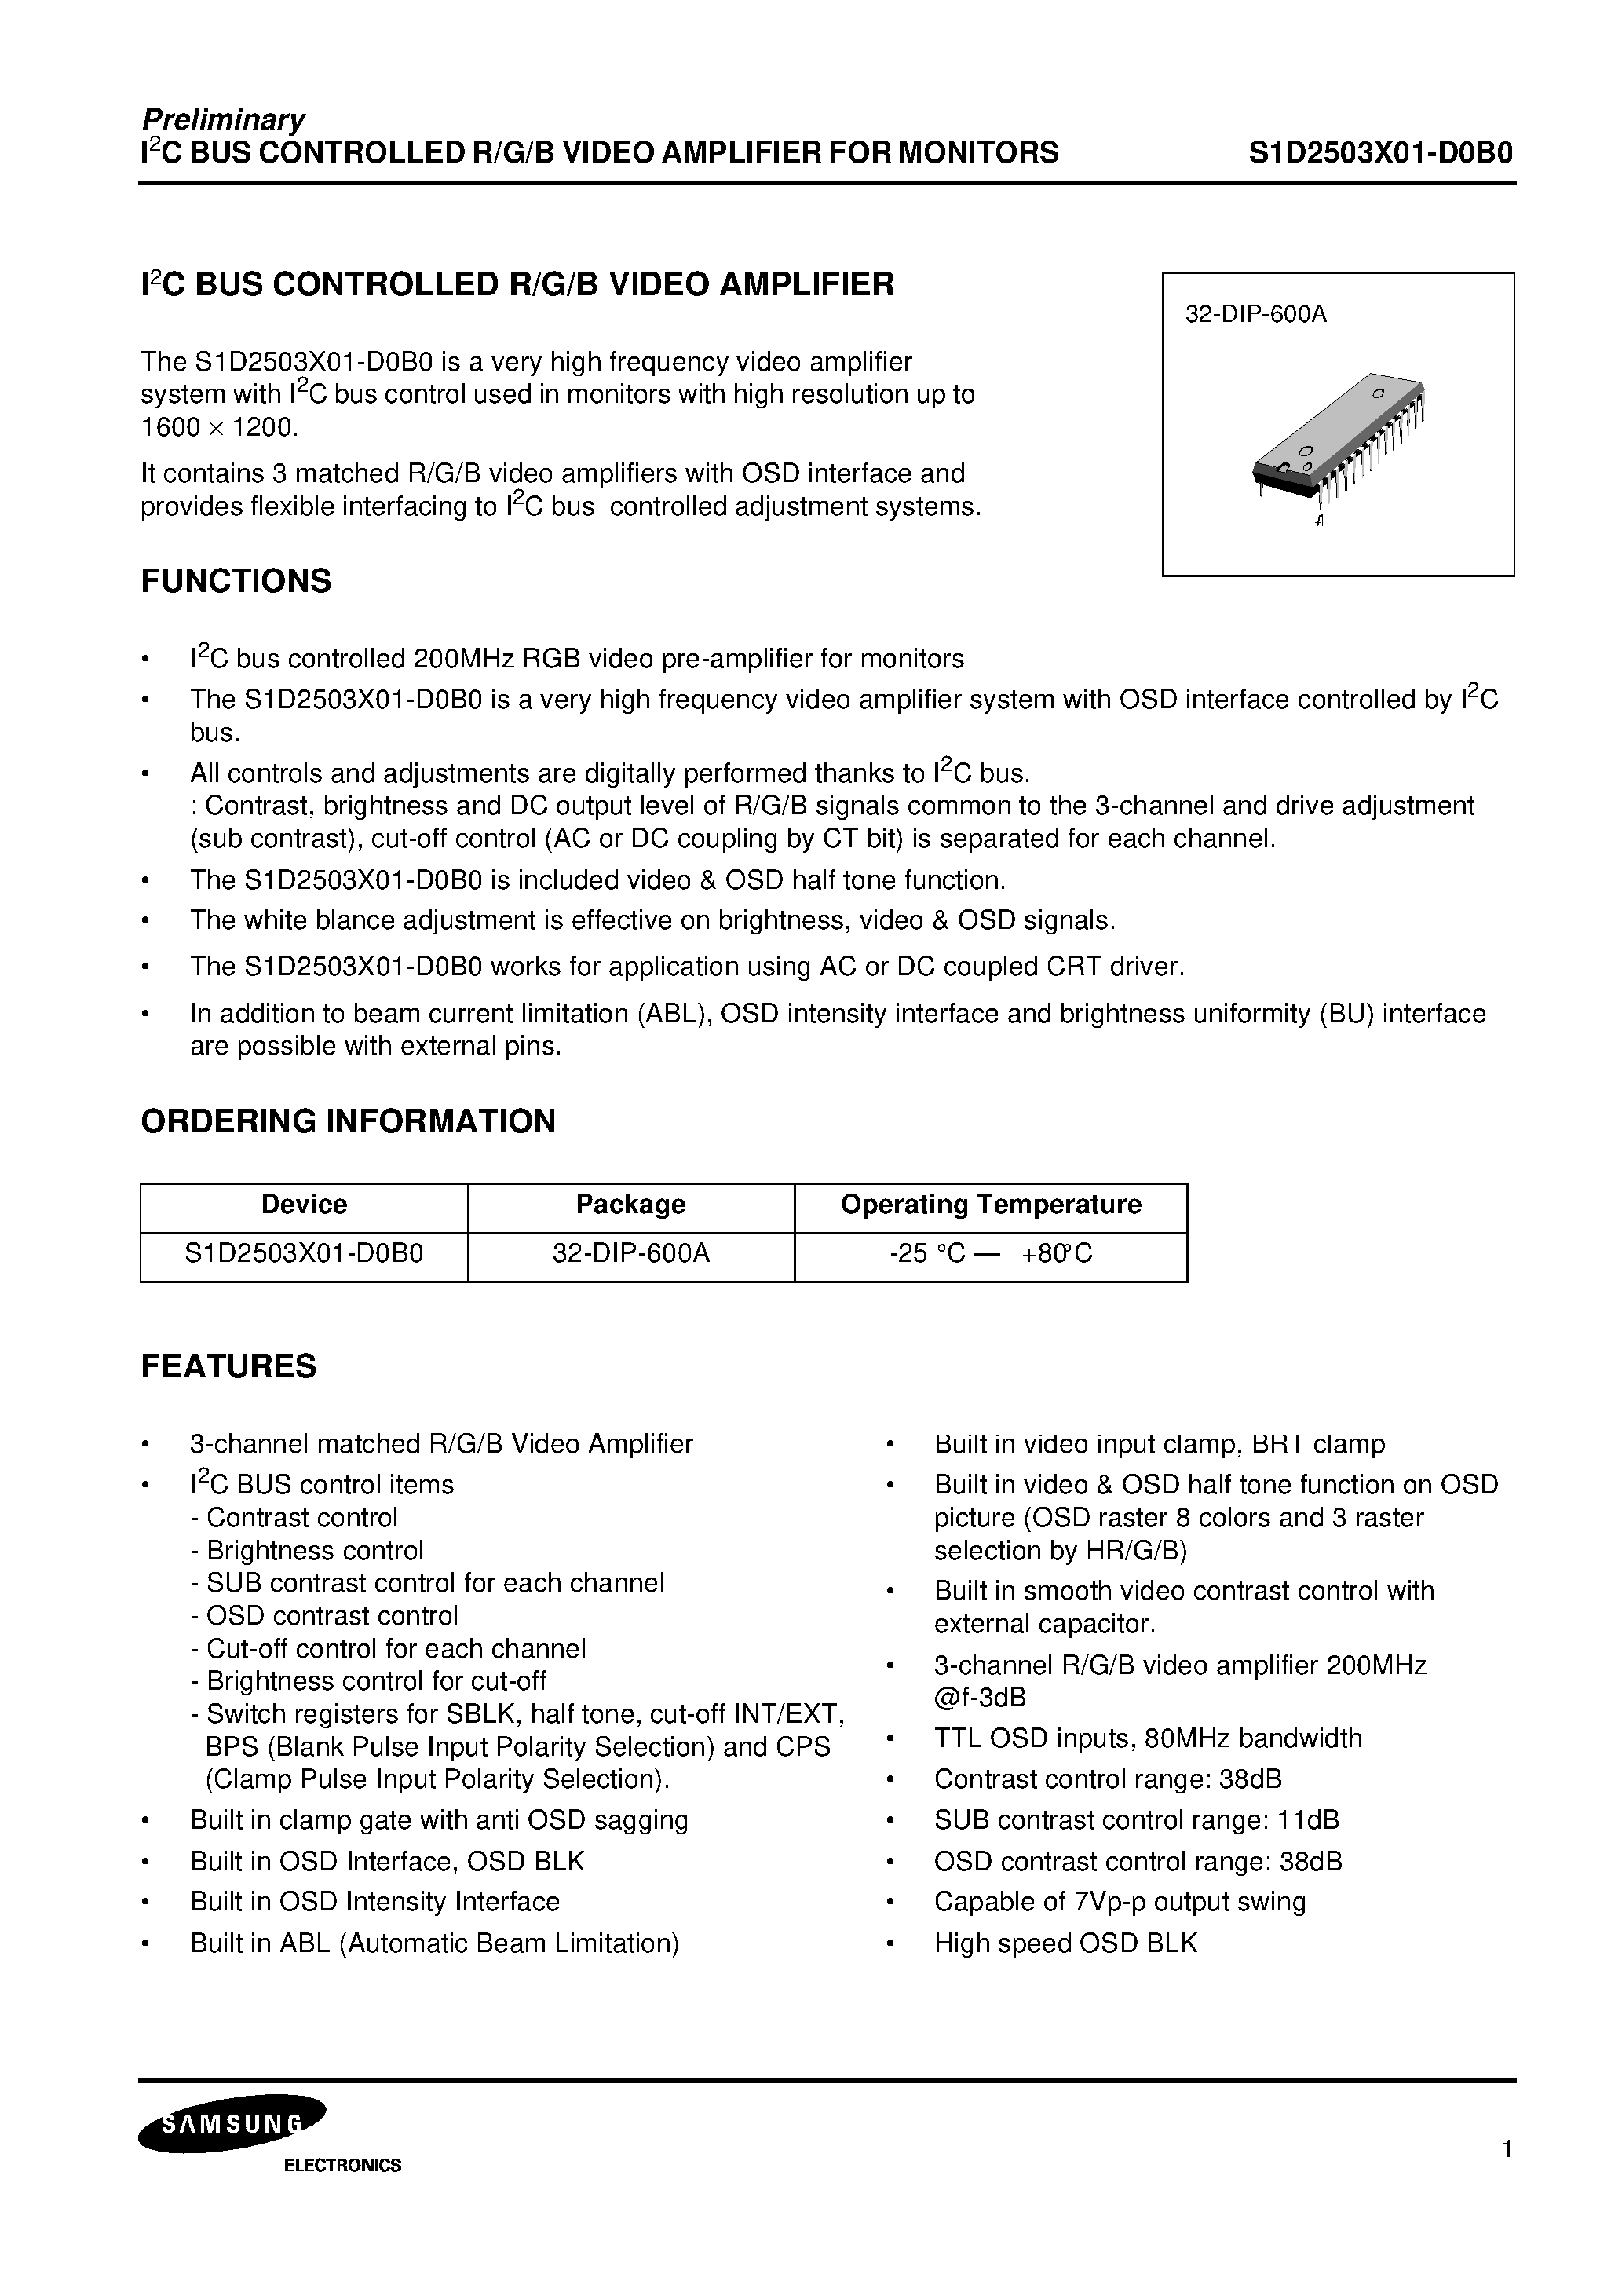 Datasheet S1D2503X01-D0B0 - I2C BUS CONTROLLED R/G/B VIDEO AMPLIFIER FOR MONITORS page 2